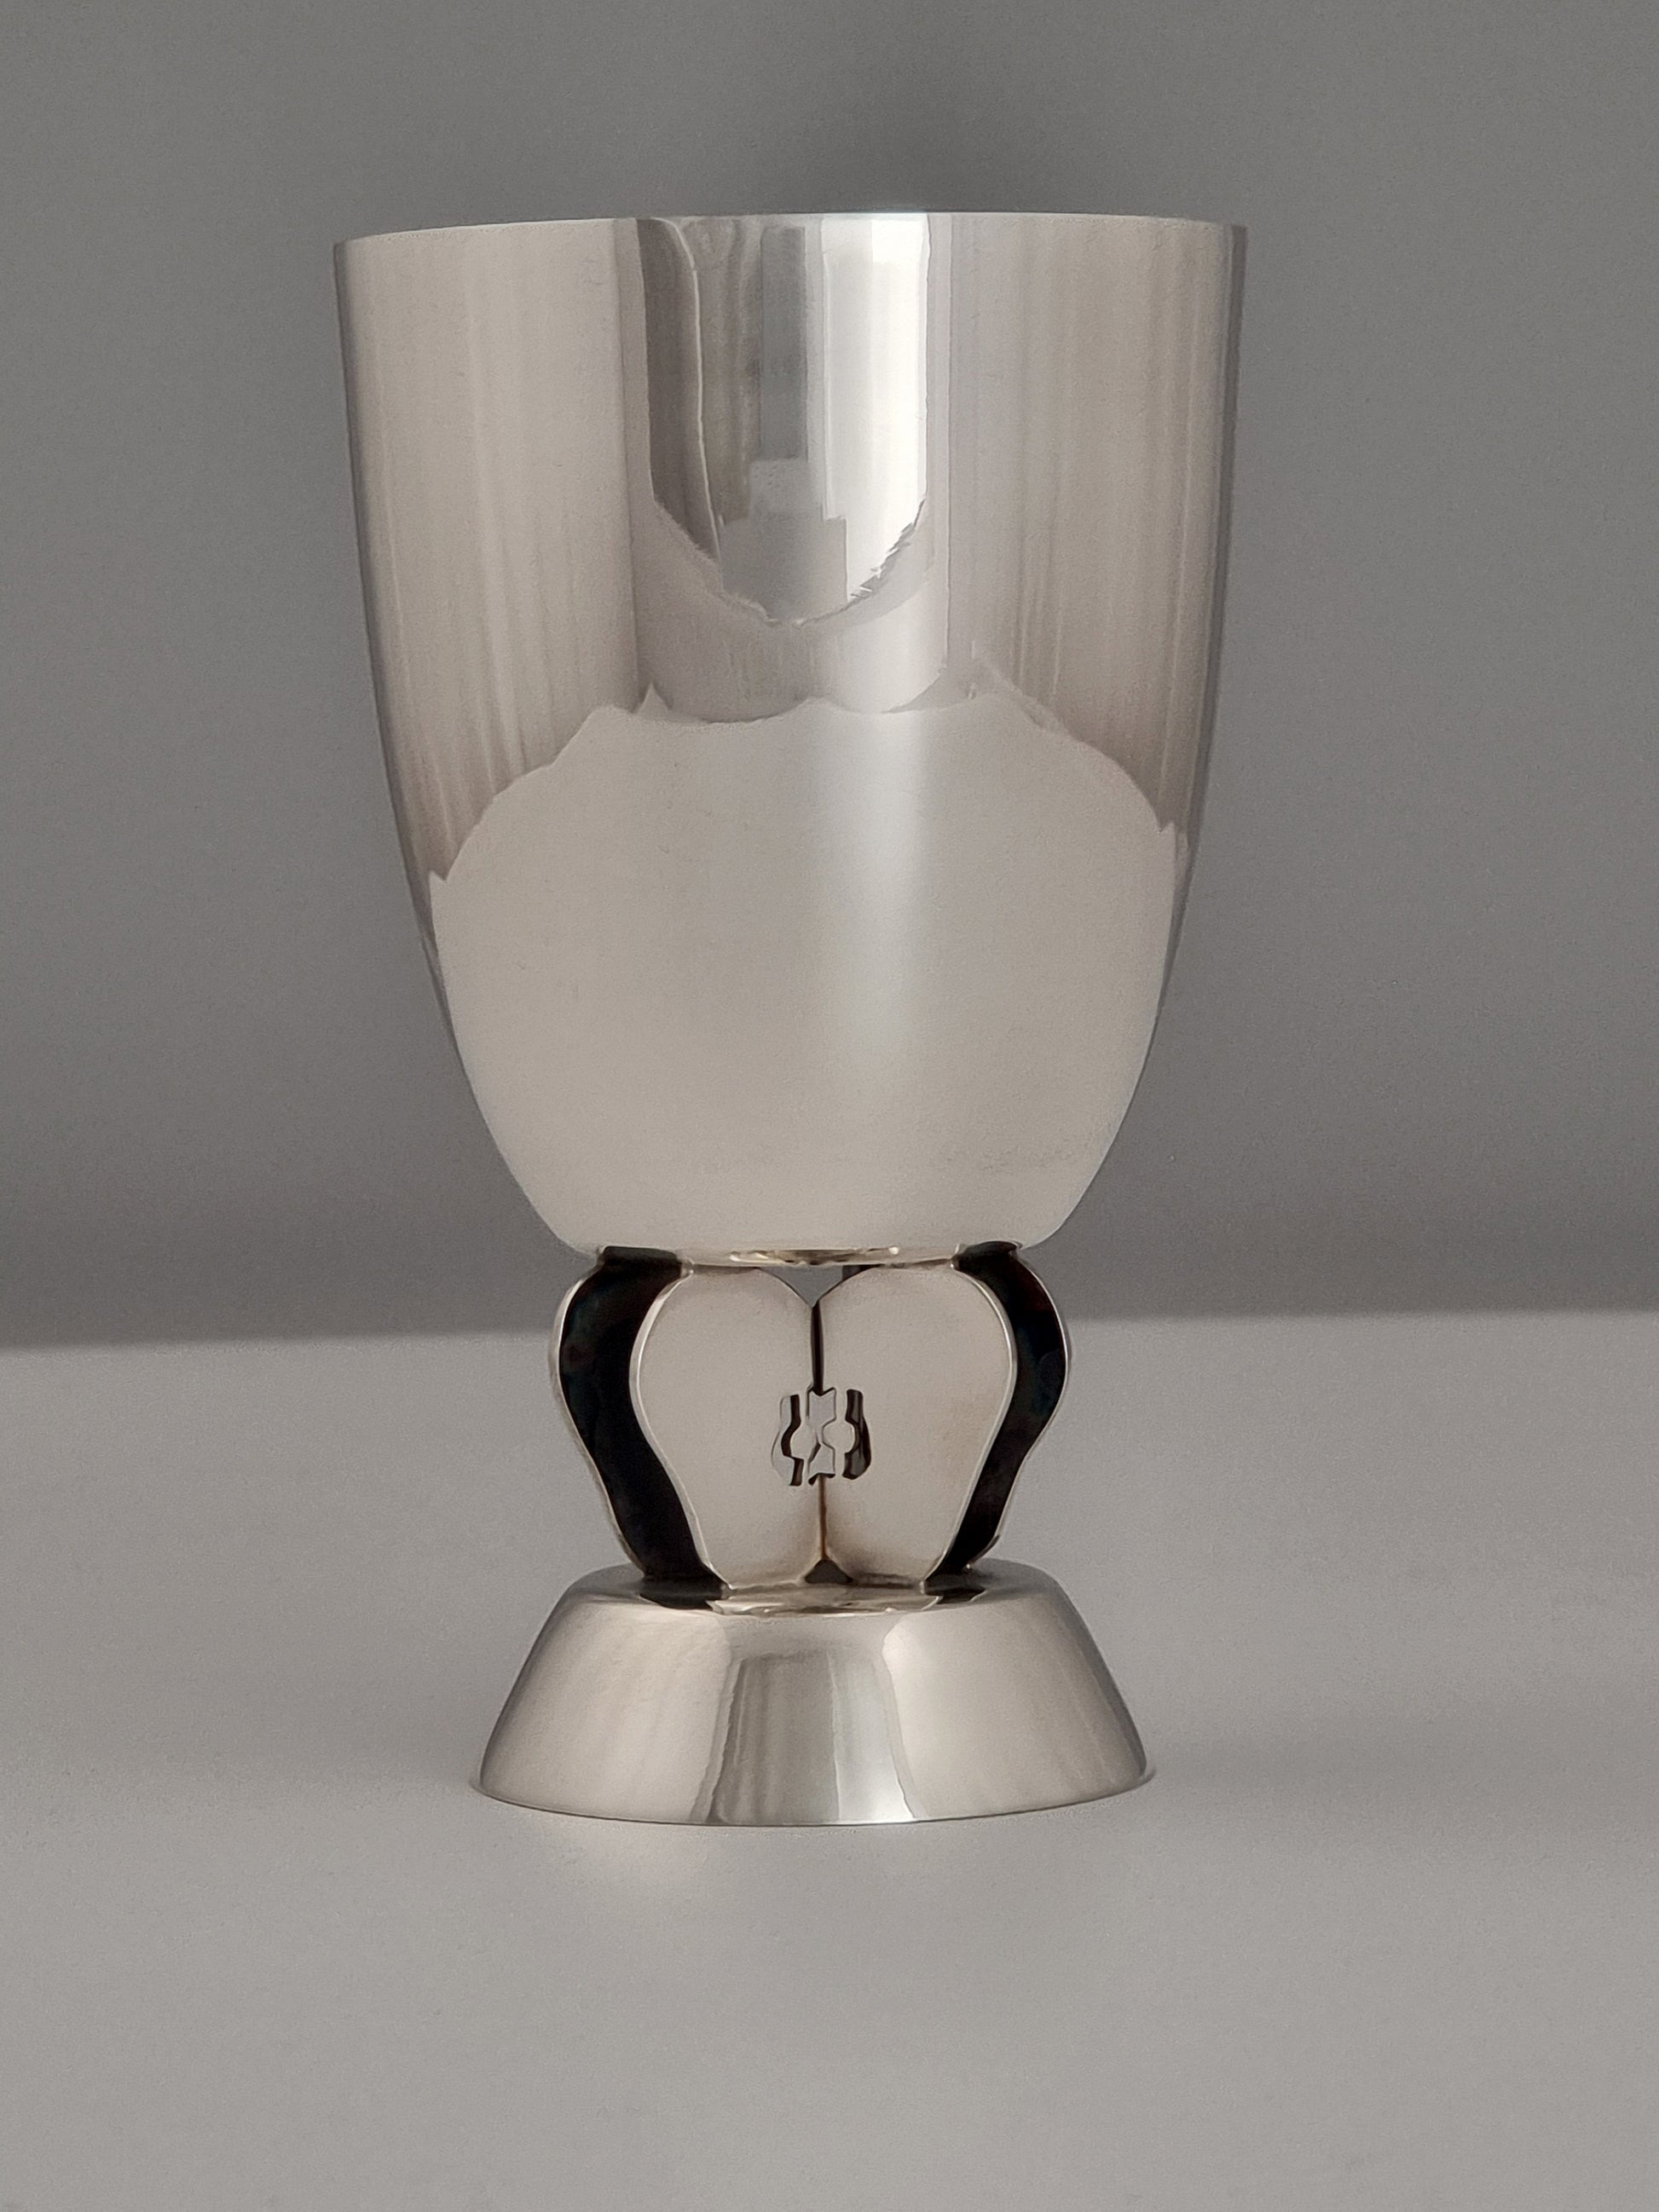 Front view of Apple Kiddush cup by Yemini shop